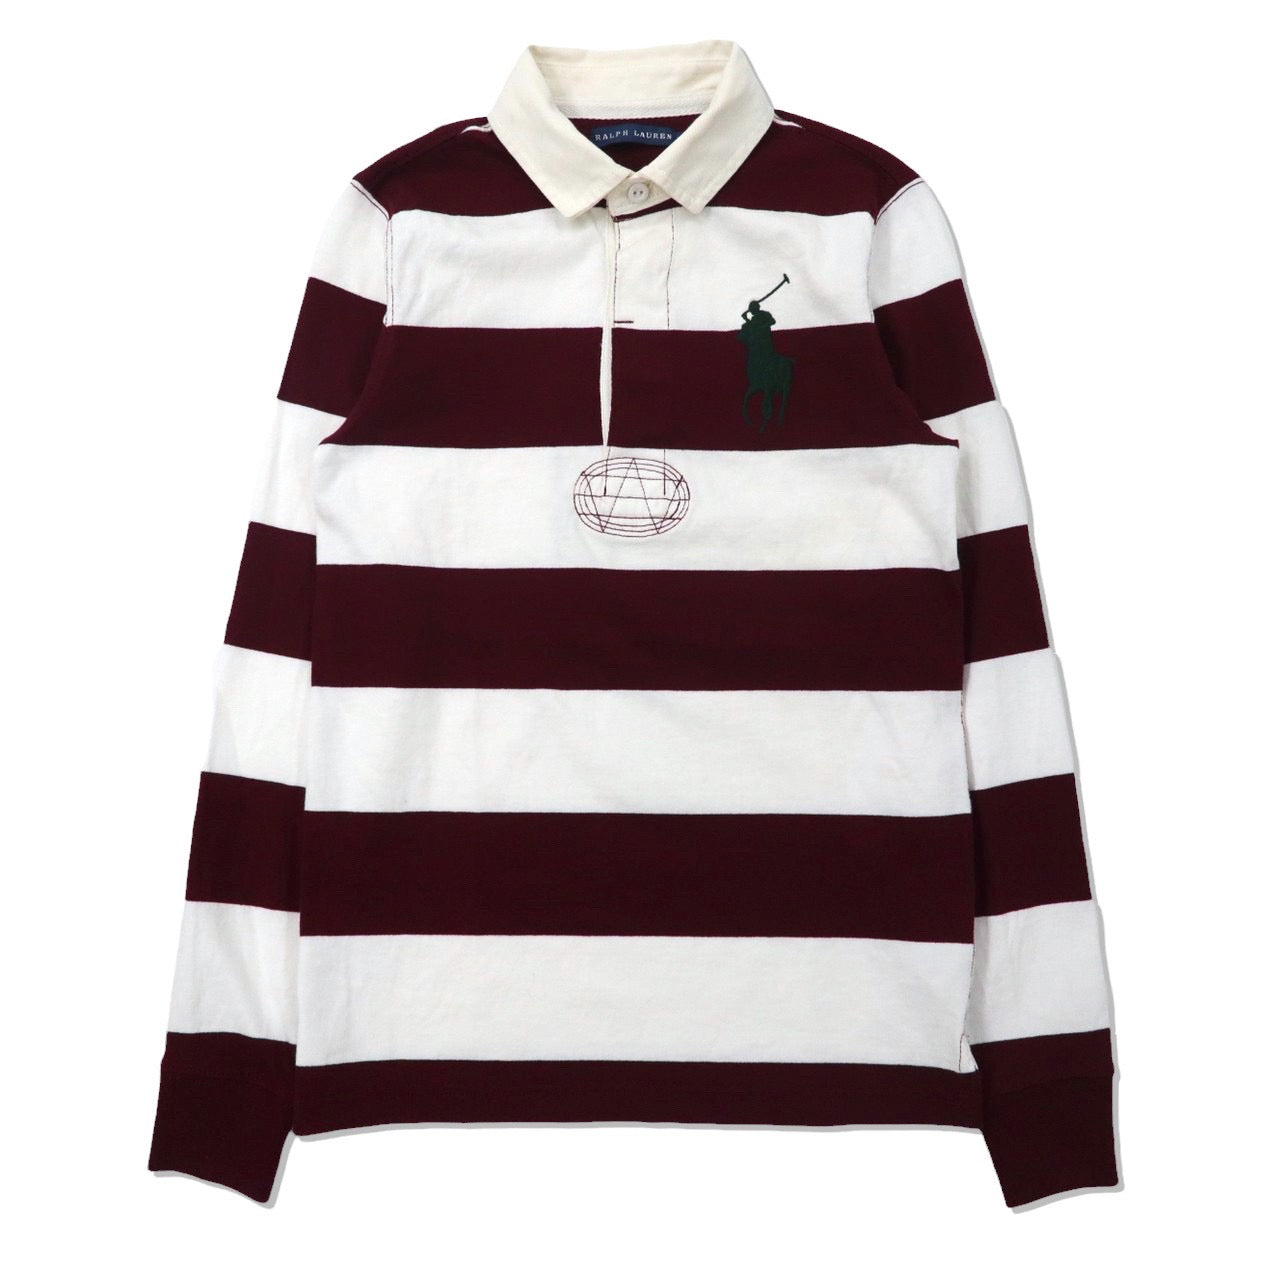 RALPH LAUREN RUGBY STRIPED Cotton Big Pony Numbering Embroidery ...